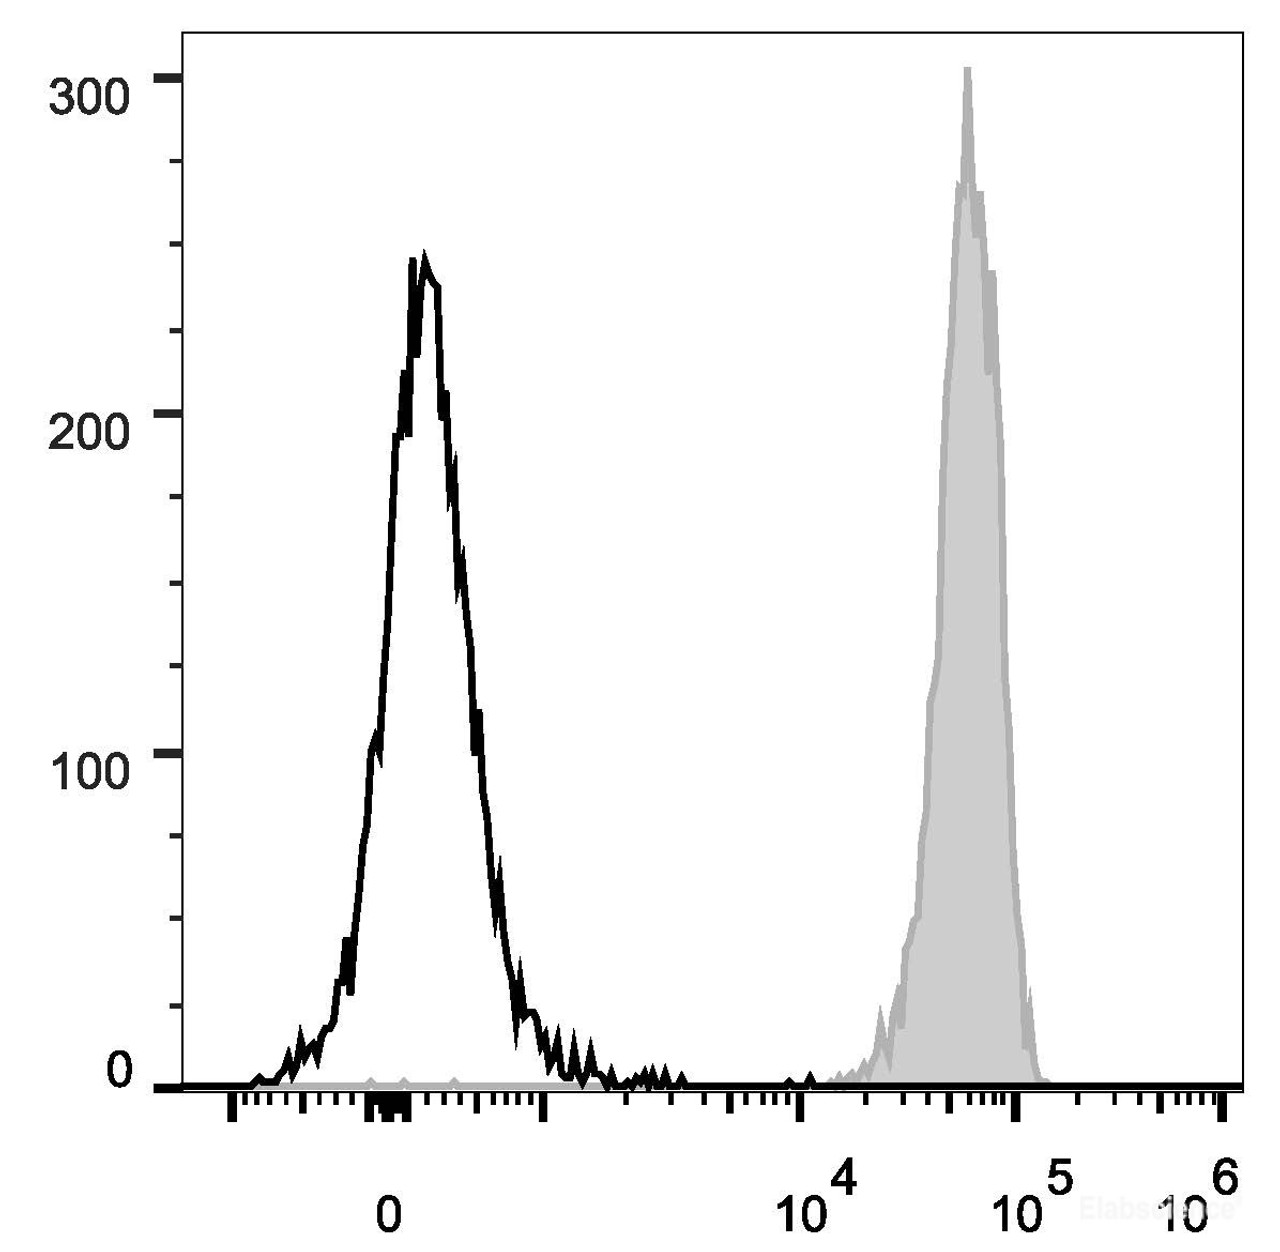 C57BL/6 murine splenocytes are stained with PerCP/Cyanine5.5 Anti-Mouse CD45 Antibody(filled gray histogram). Unstained splenocytes (empty black histogram) are used as control.